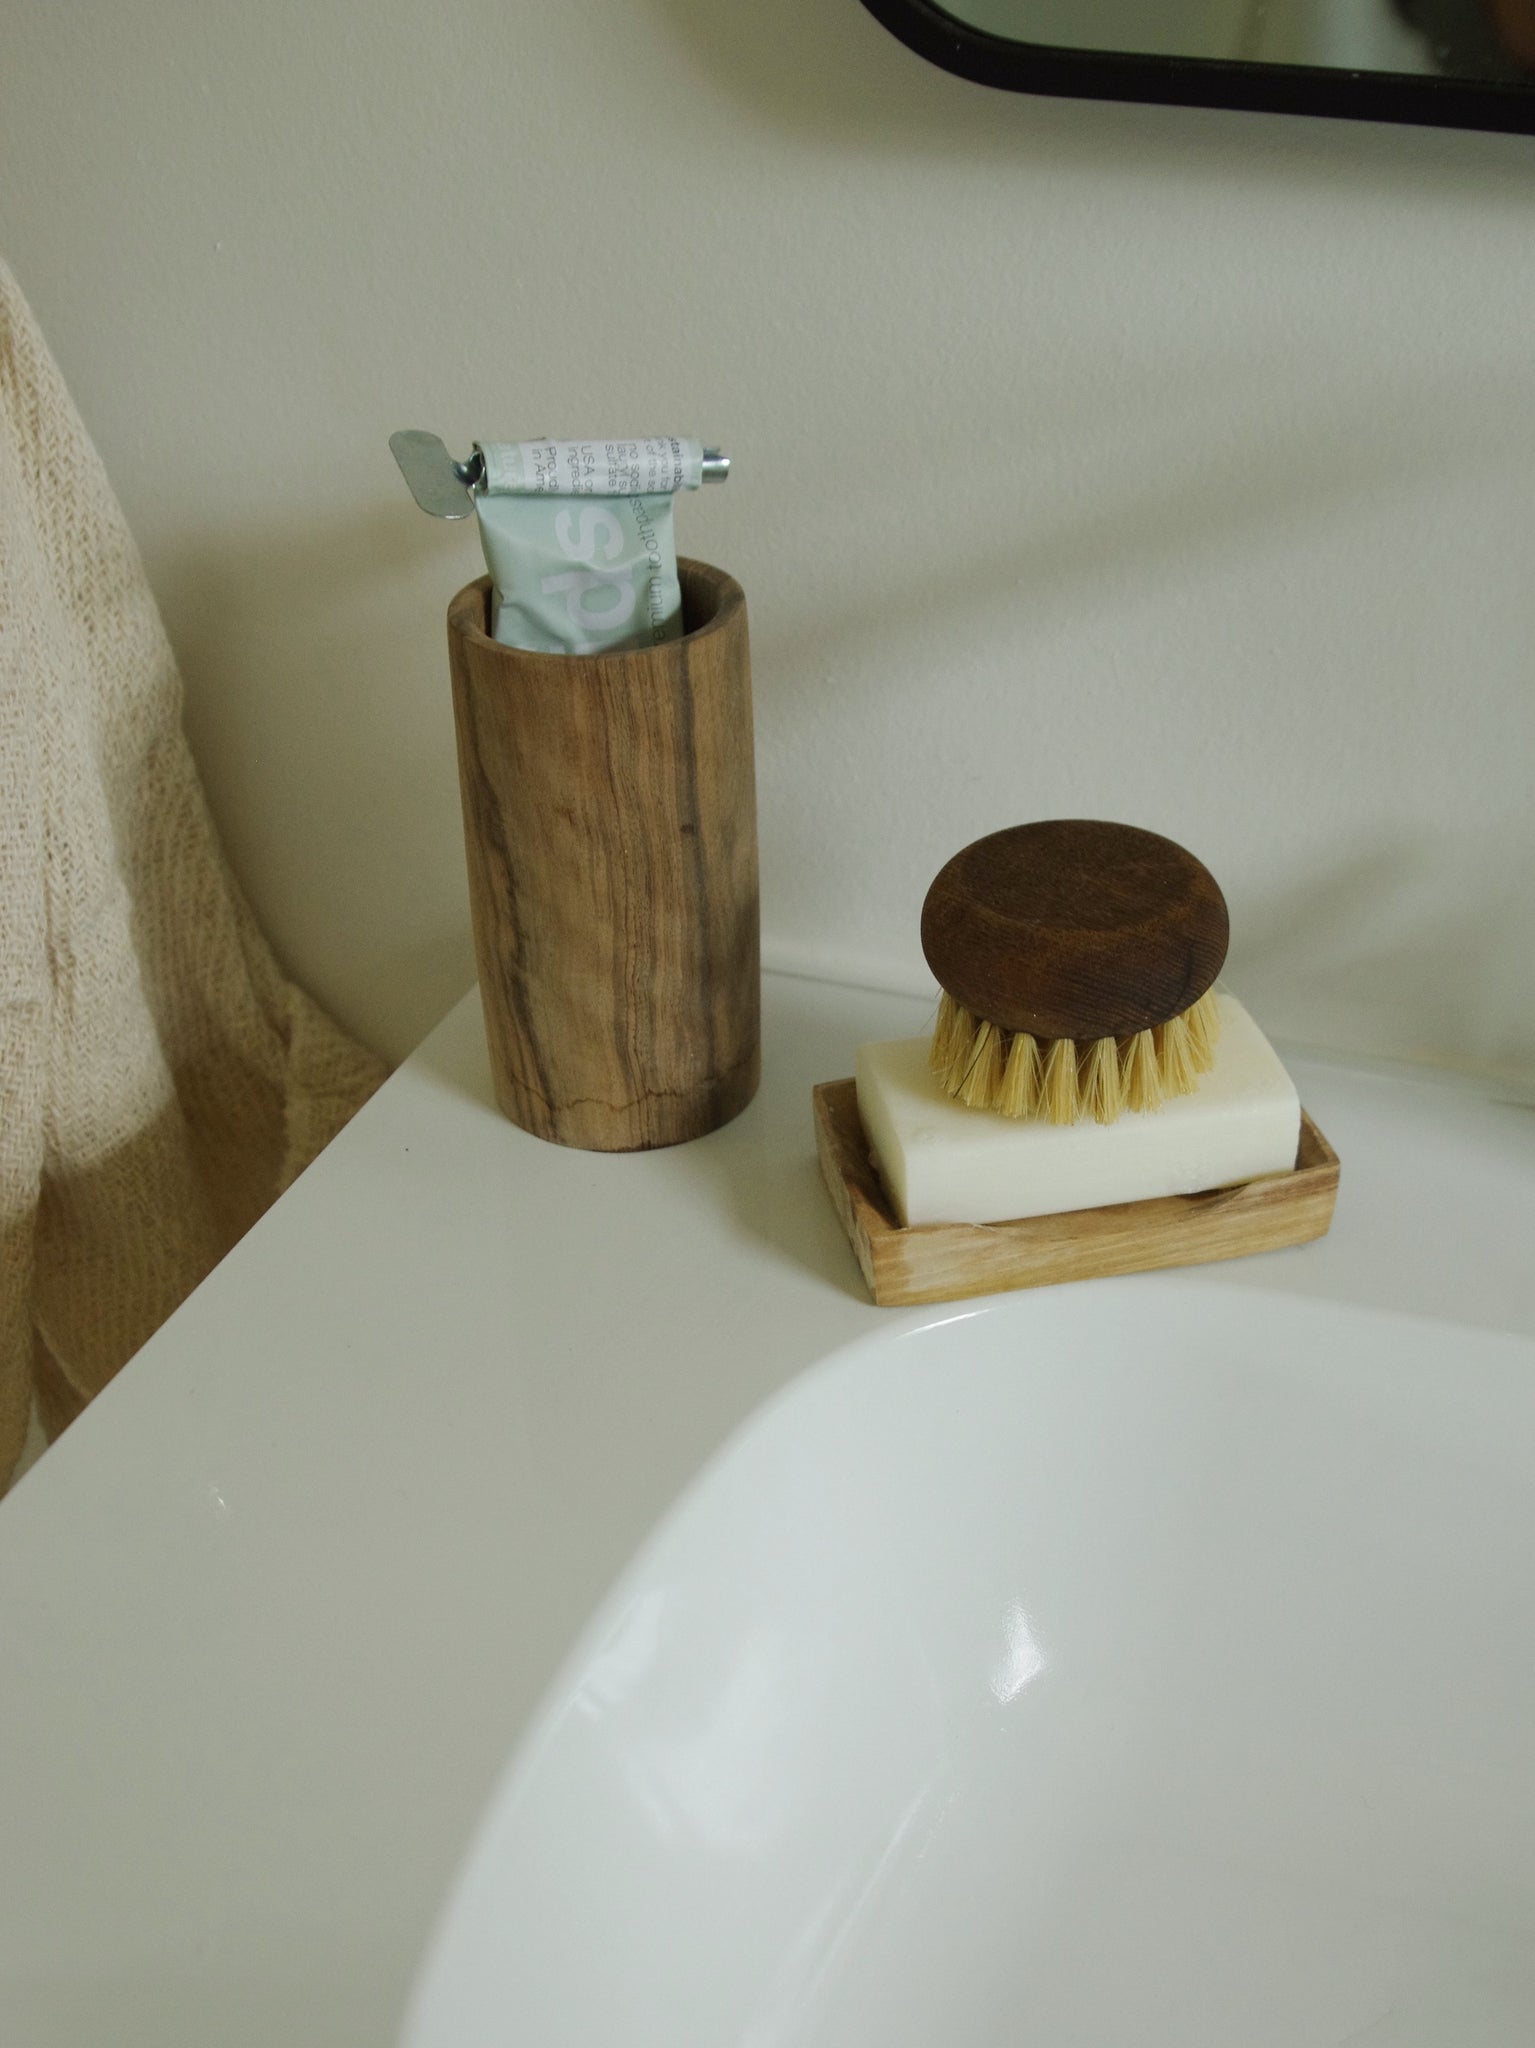 Wooden cup holding toothpaste next to wooden soap tray.